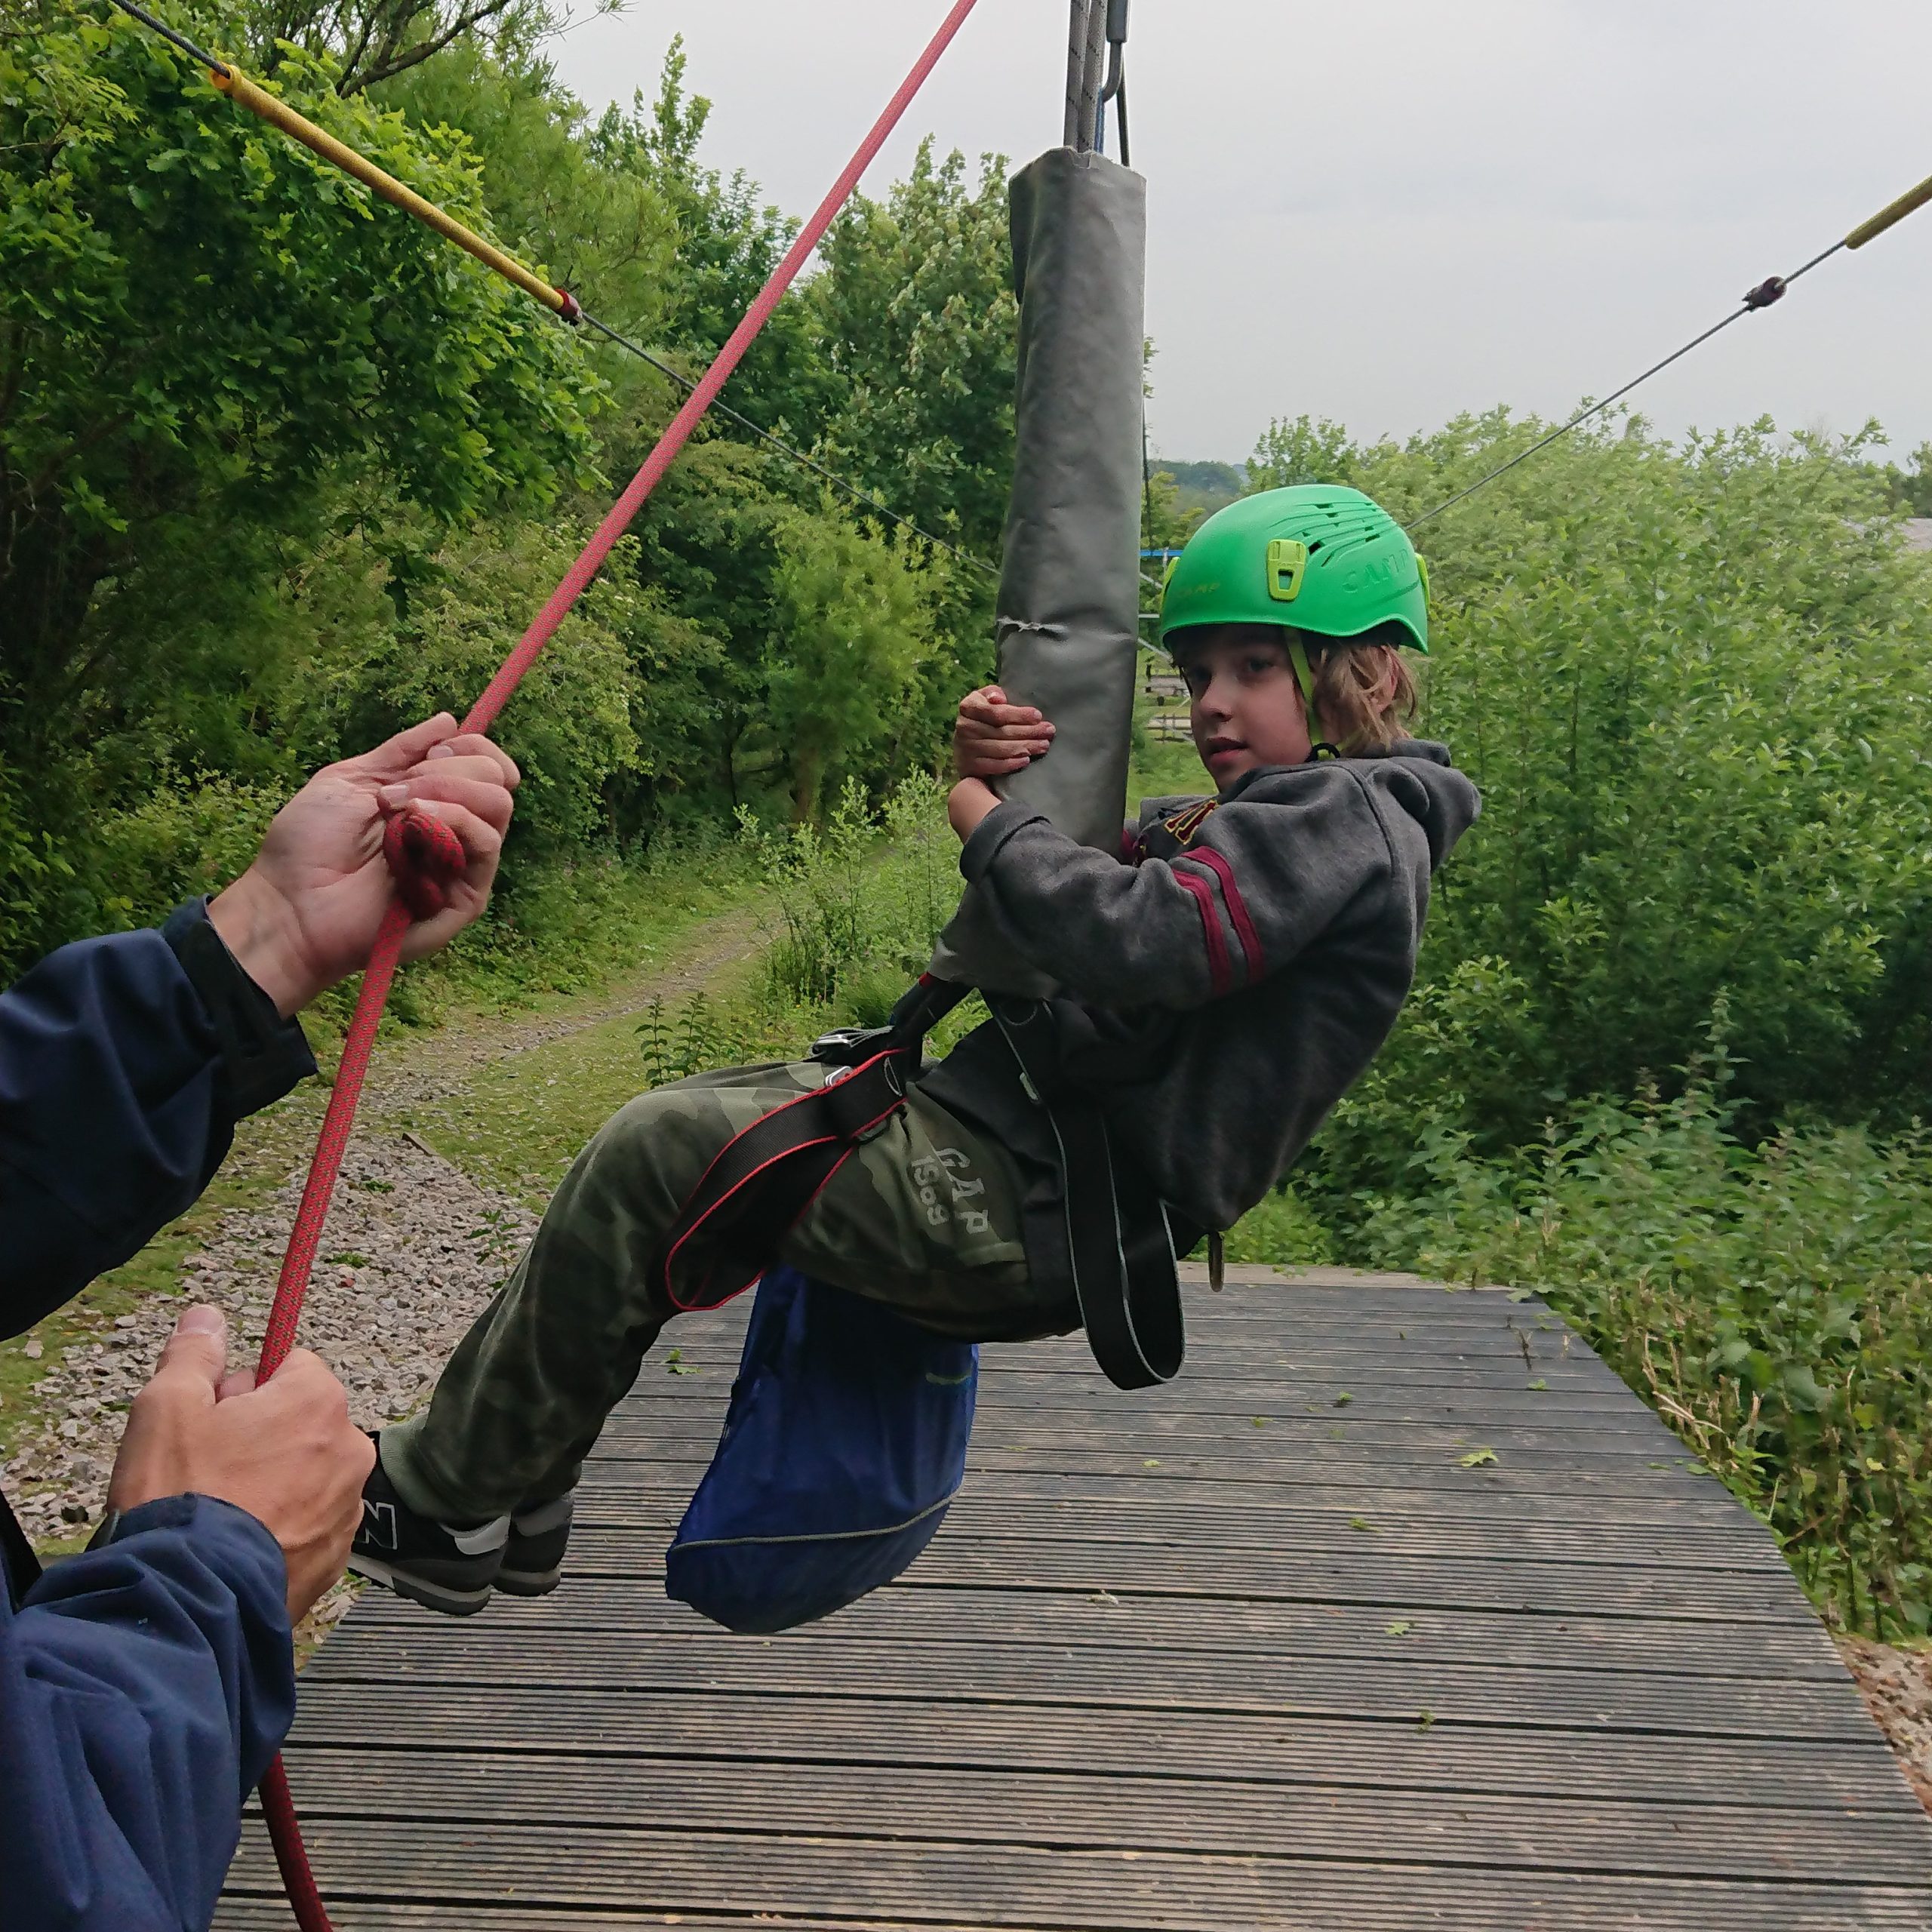 A boy wearing a dark green sweatshirt and tracksuits and a bright green helmet is looking at someone whose arm is in the photo, holding a red rope. The boy with the green hat is suspended in a seated position in the air by a zipwire and harness.